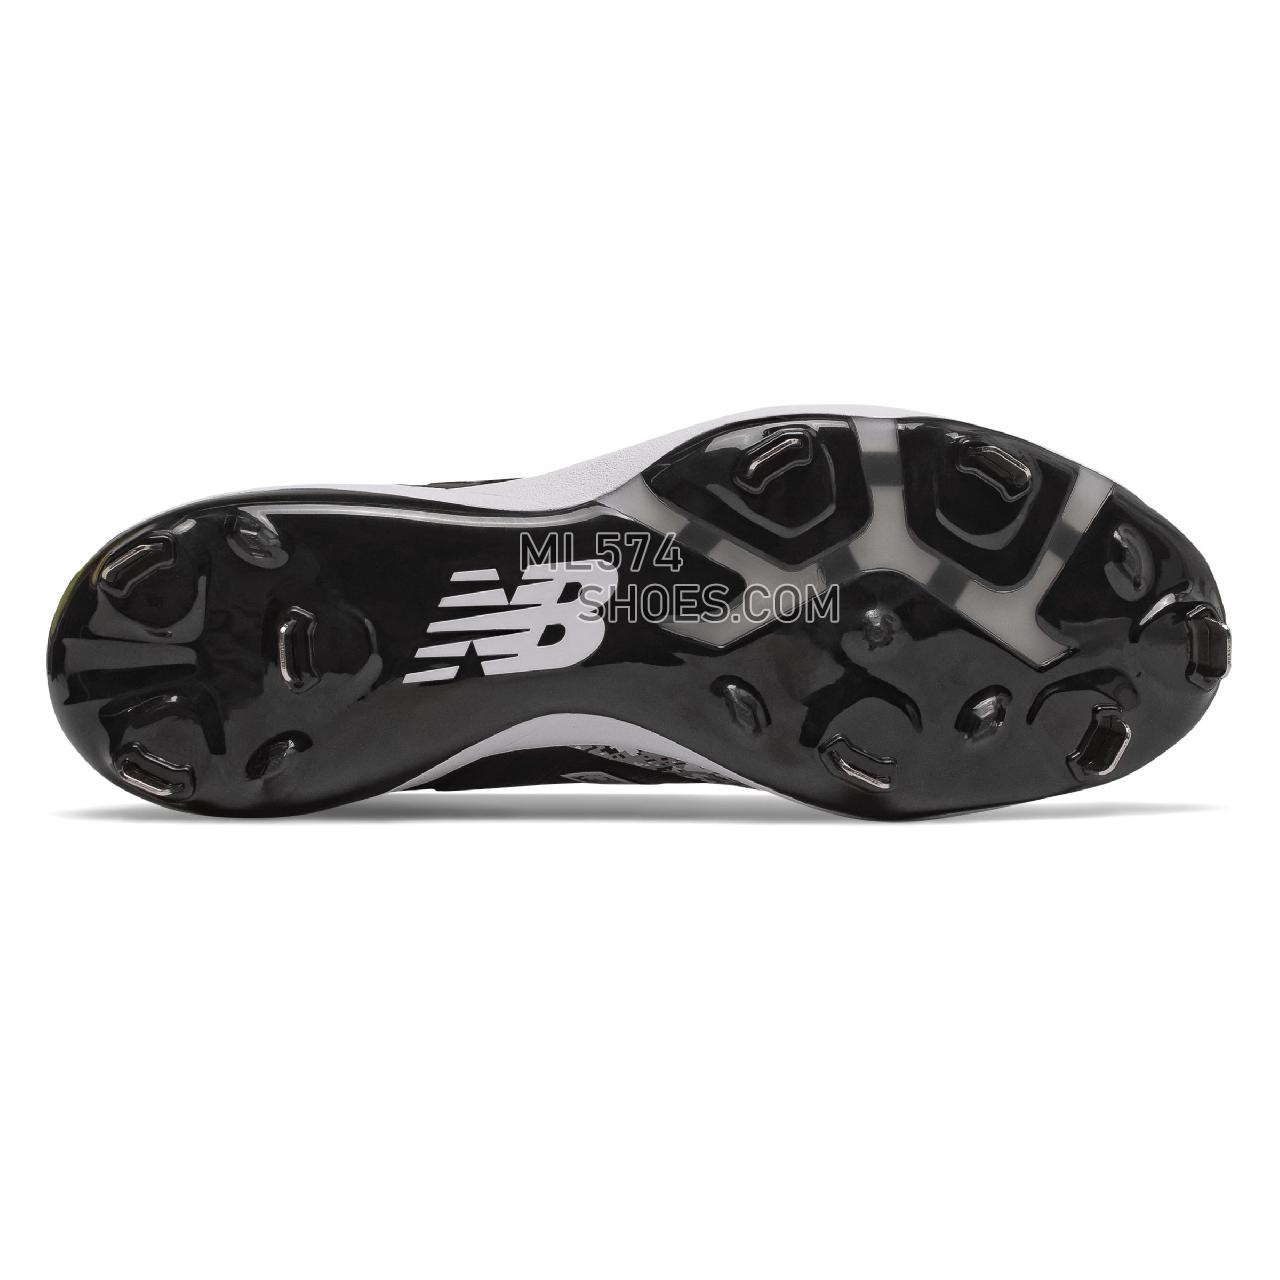 New Balance 4040v5 Pedroia Metal - Men's Baseball Turf - Black Camo with White and Red - L4040PK5